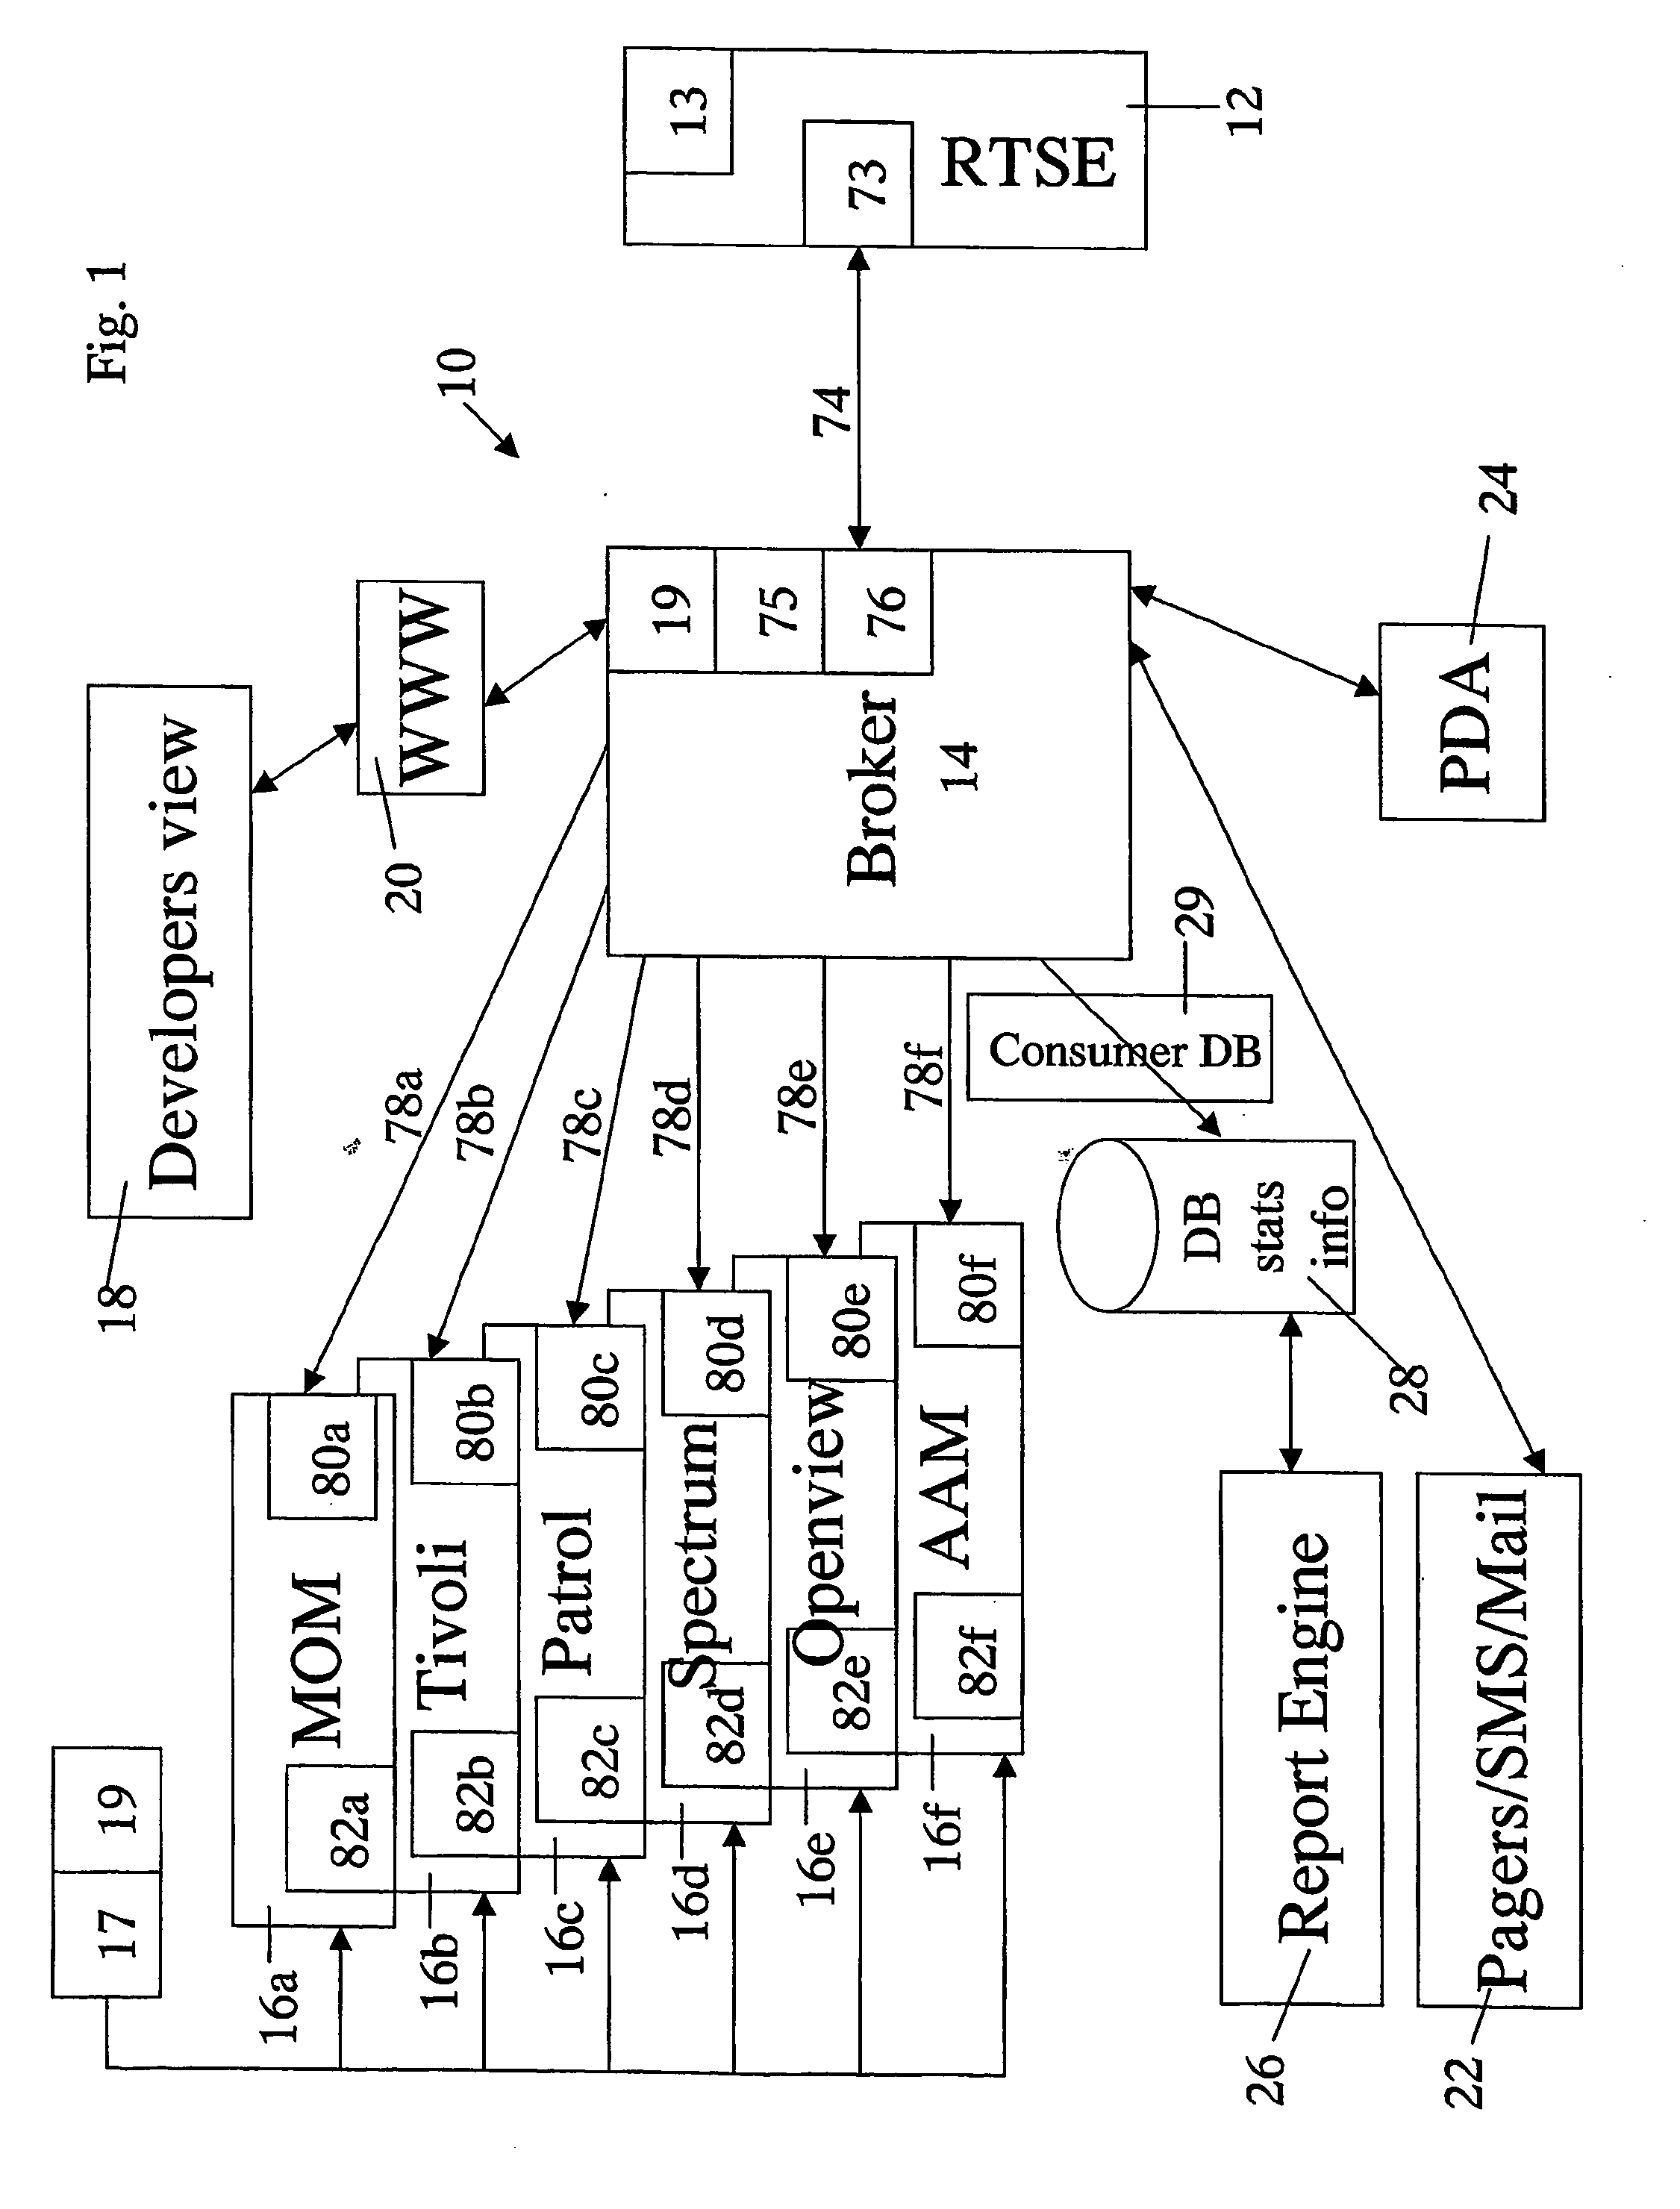 Method for monitoring and managing an information system